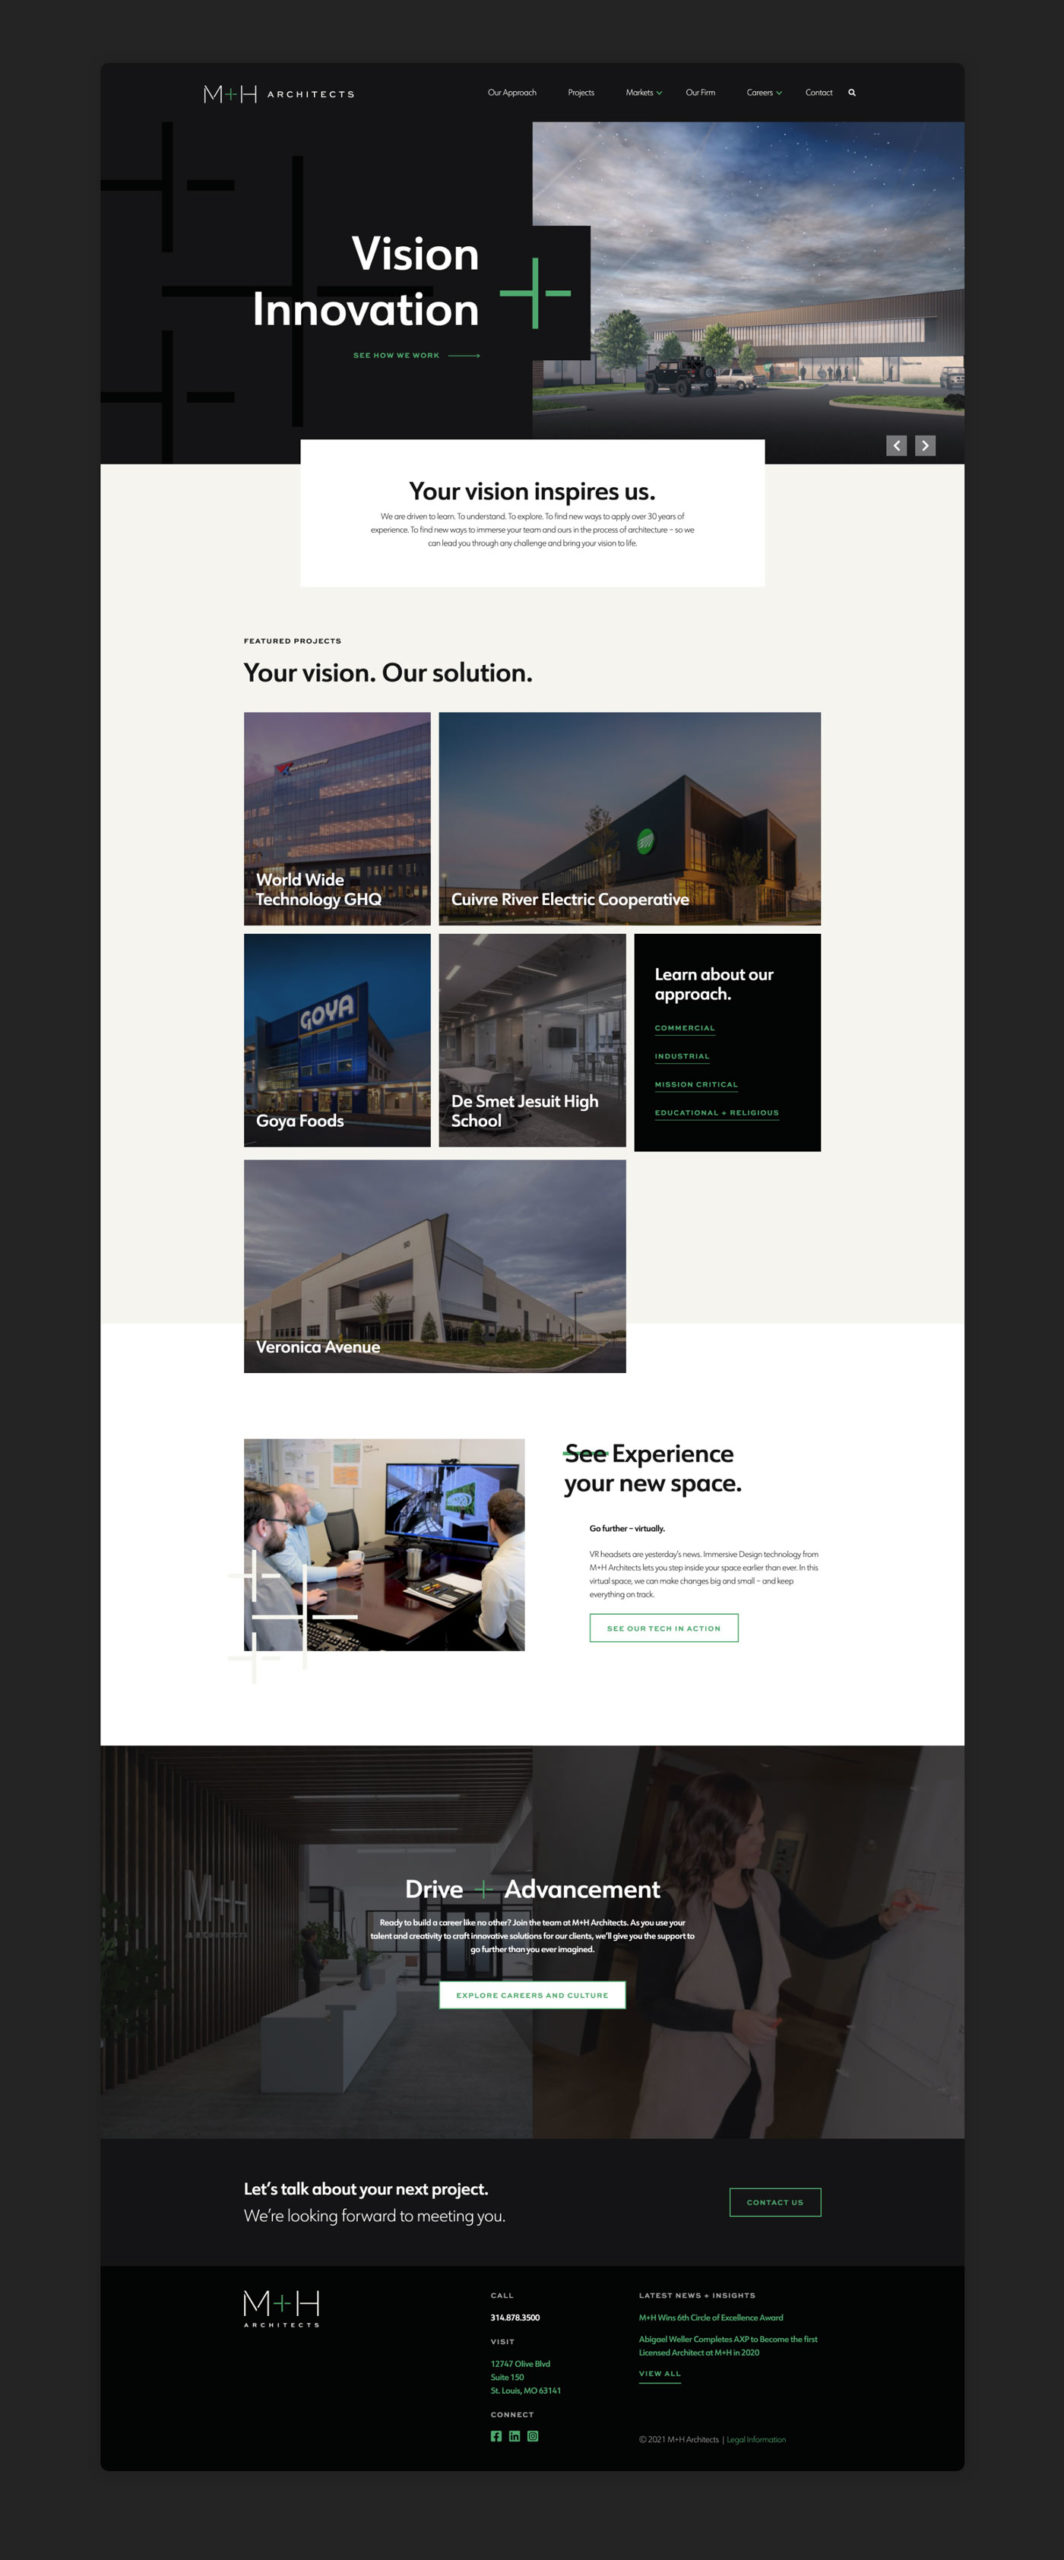 The homepage of the new M+H Architects website design